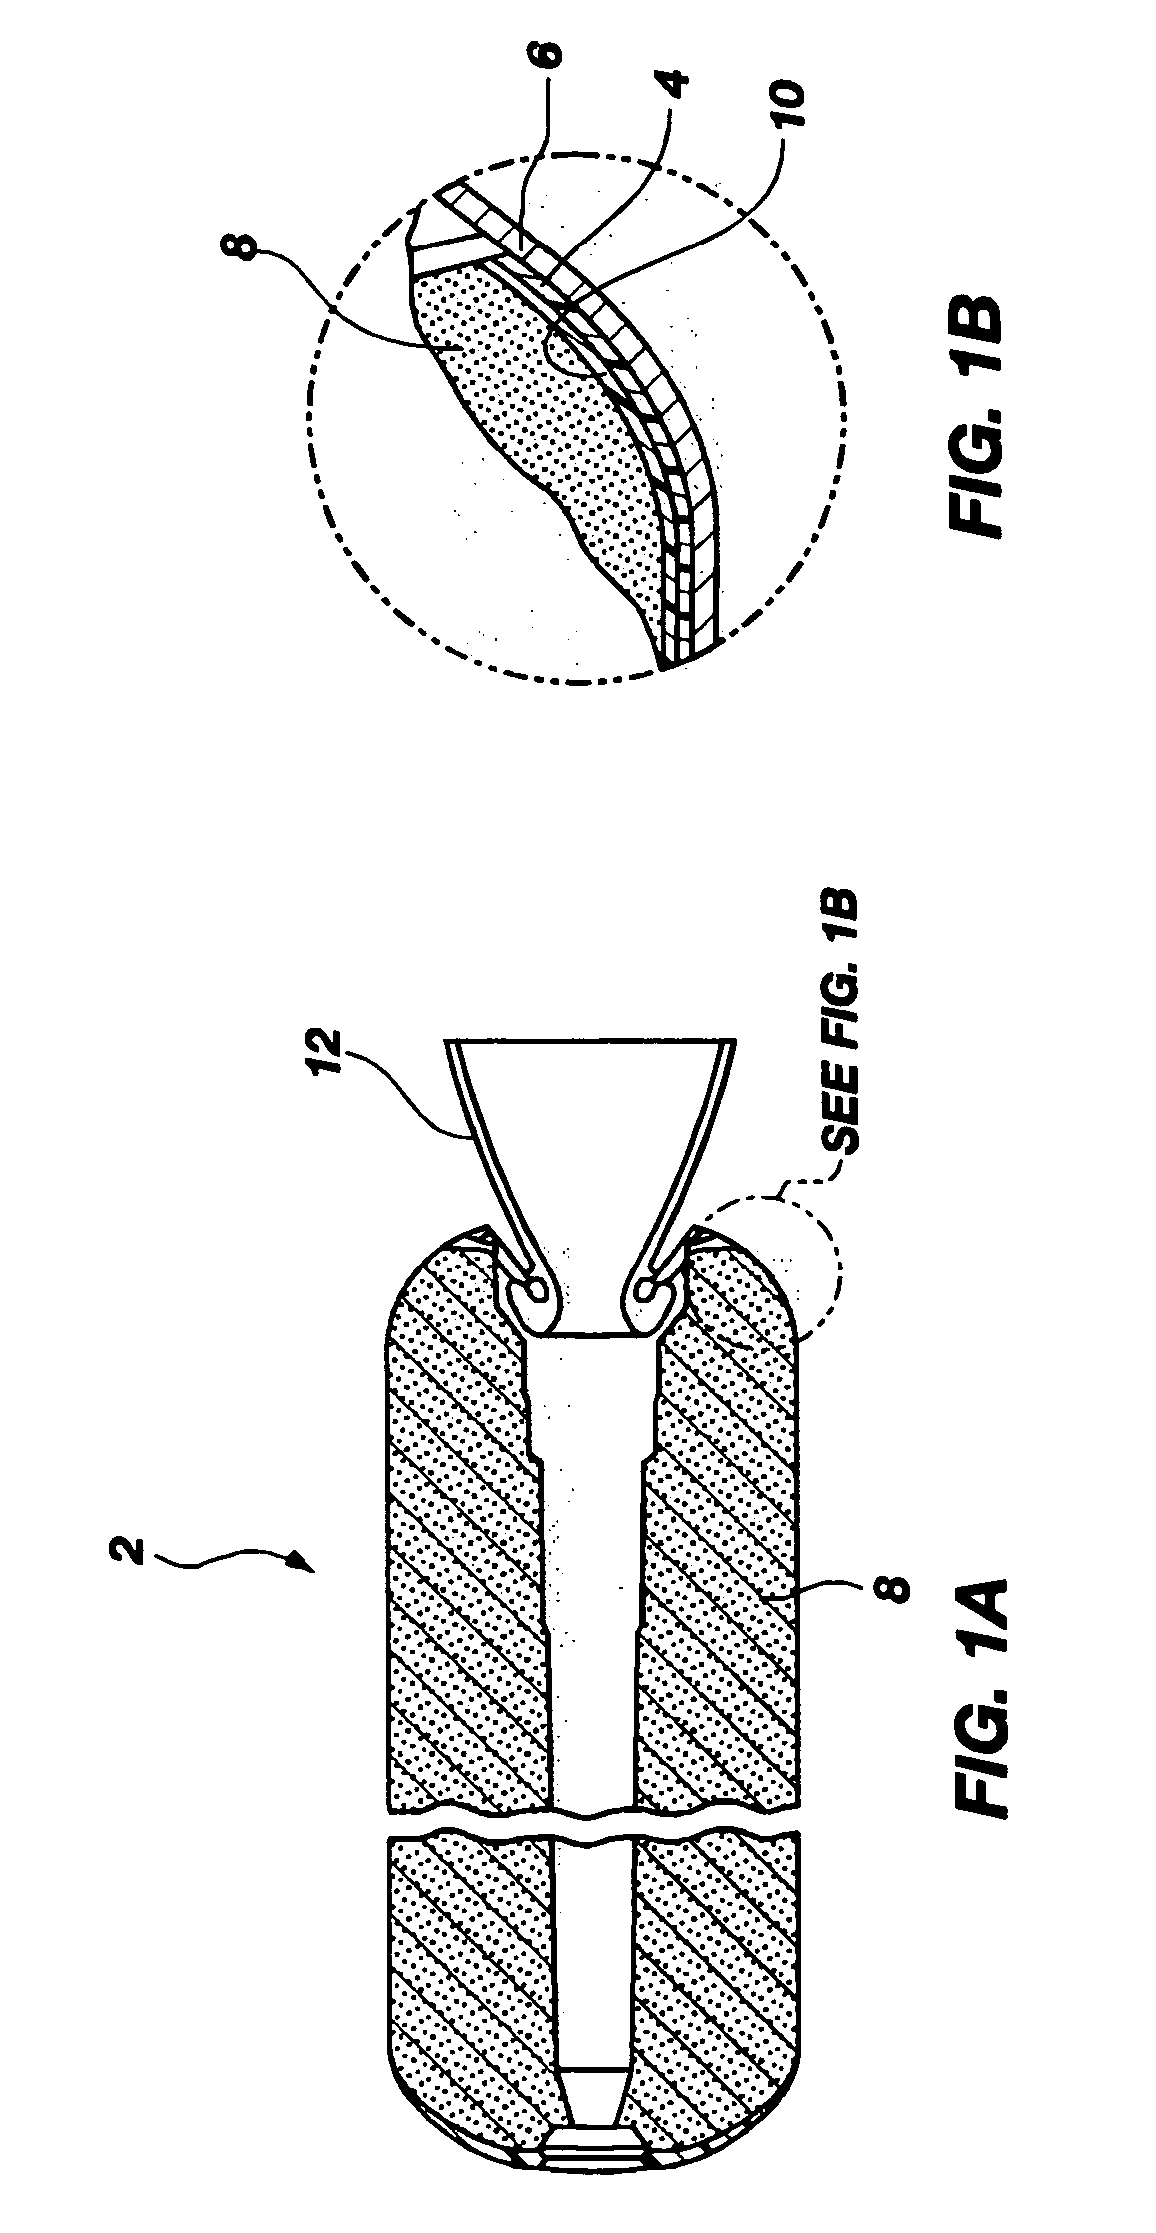 Basalt fiber and nanoclay compositions, articles incorporating the same, and methods of insulating a rocket motor with the same